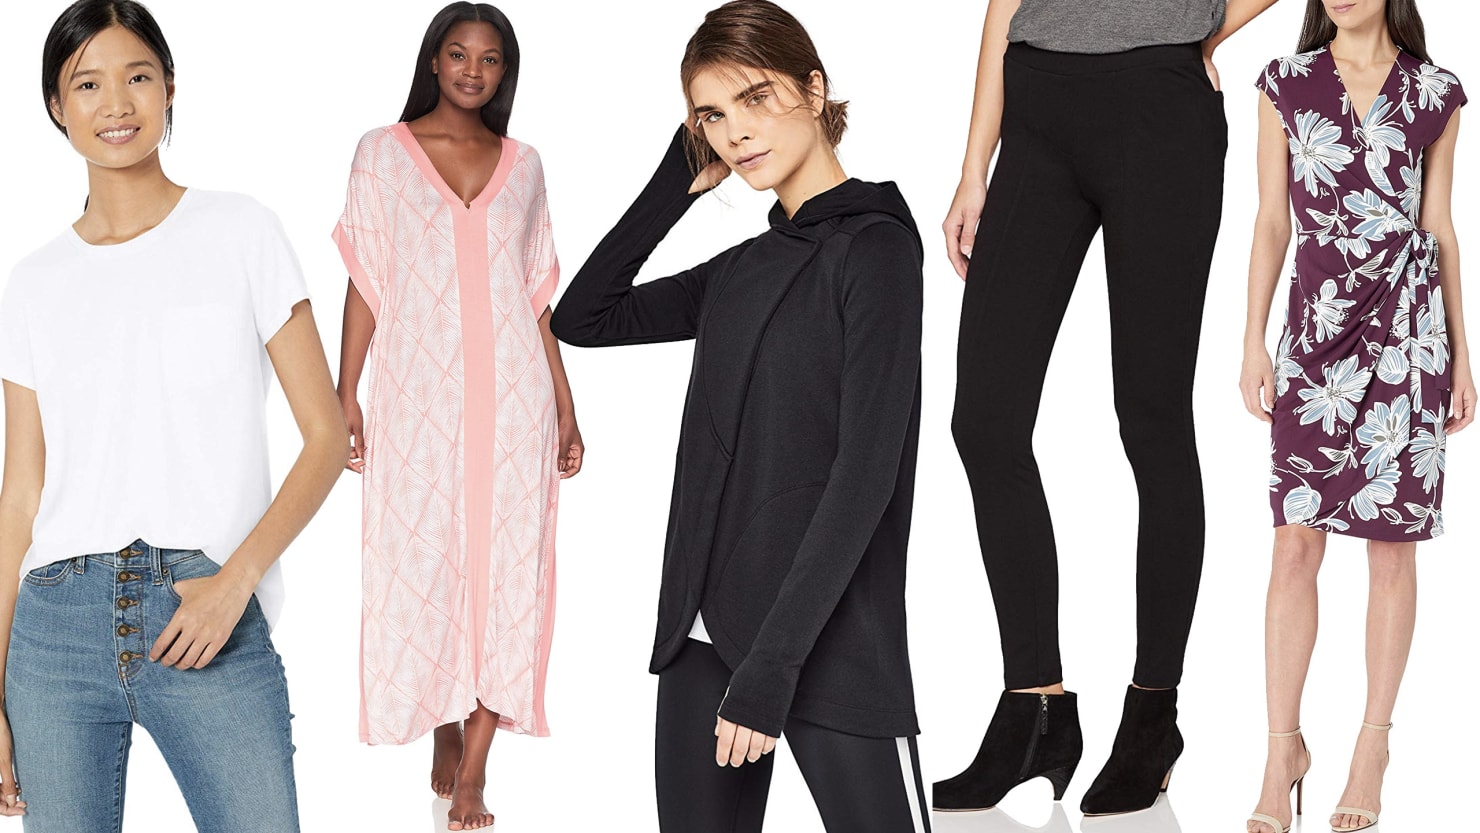 The Best Apparel Items from Amazon’s Private Label Womenswear Brands